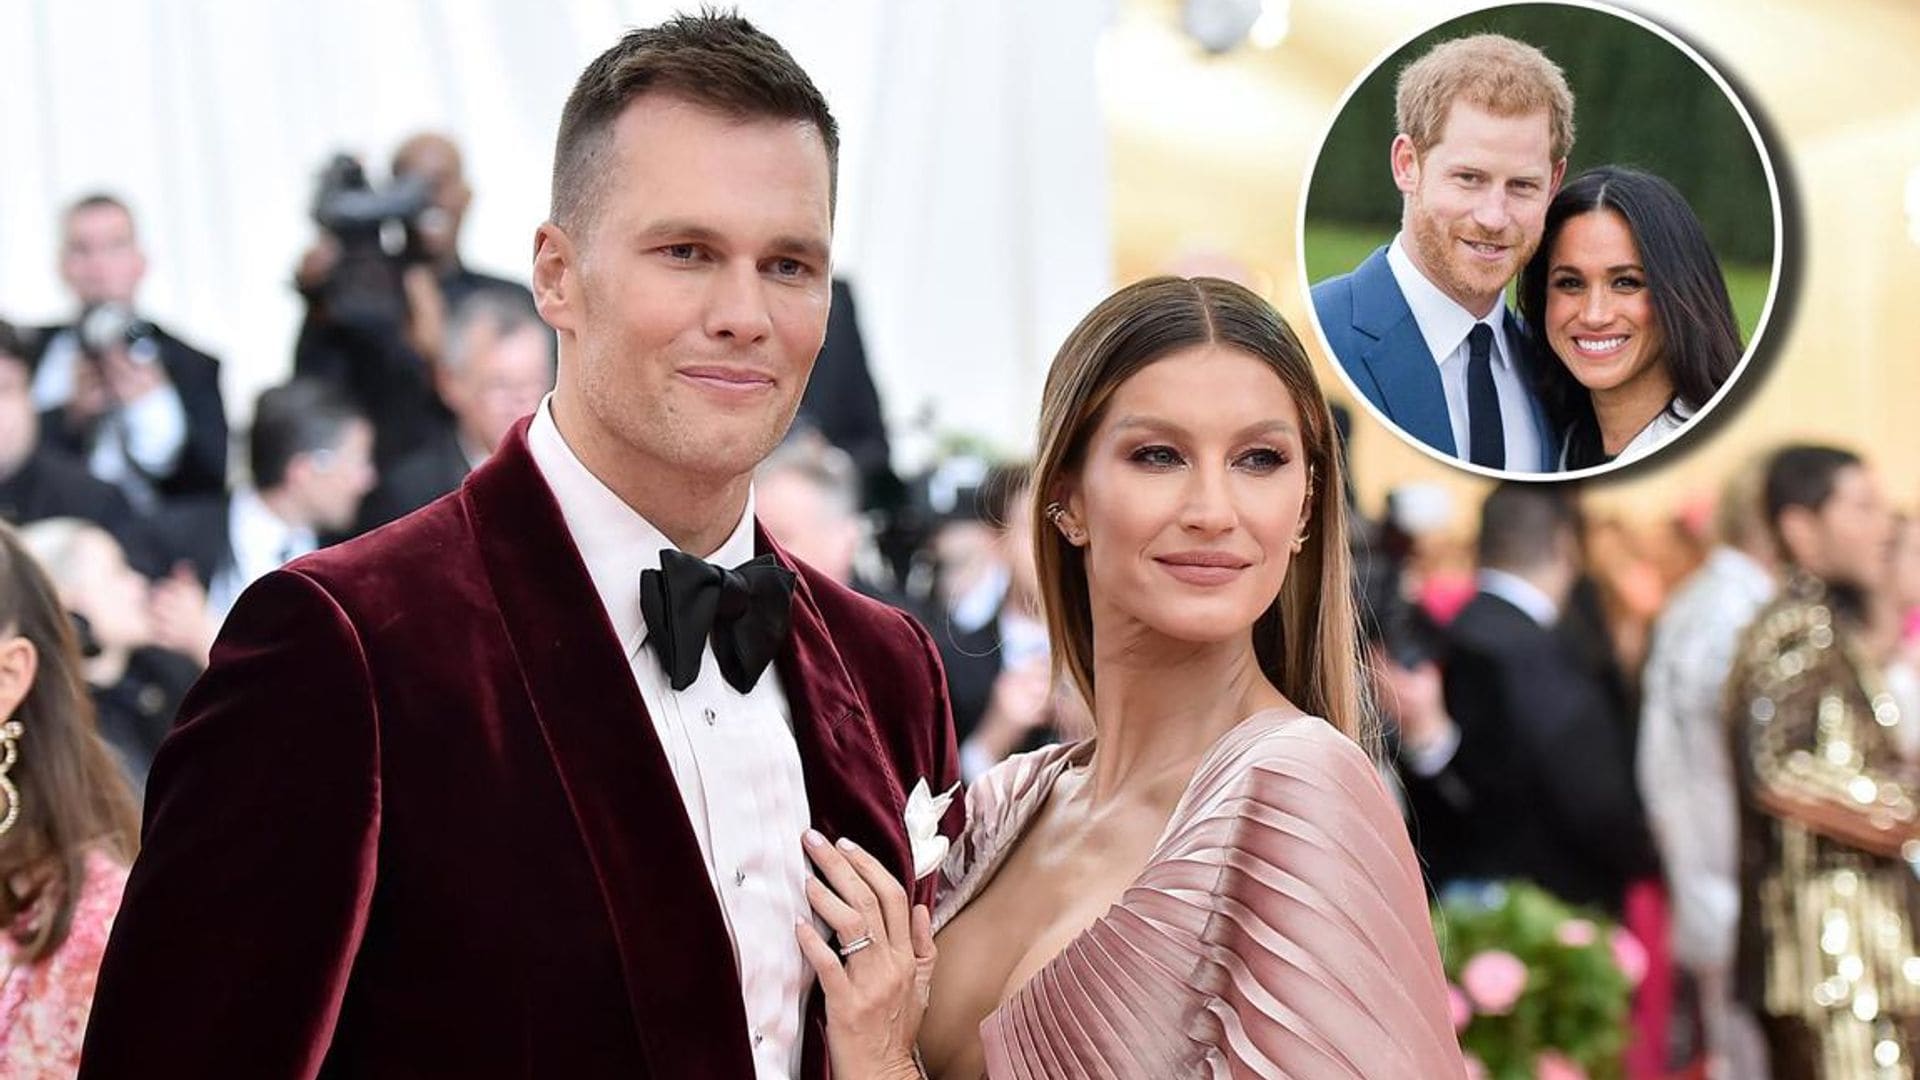 Gisele Bundchen and Tom Brady channel Meghan and Harry with loved-up pic